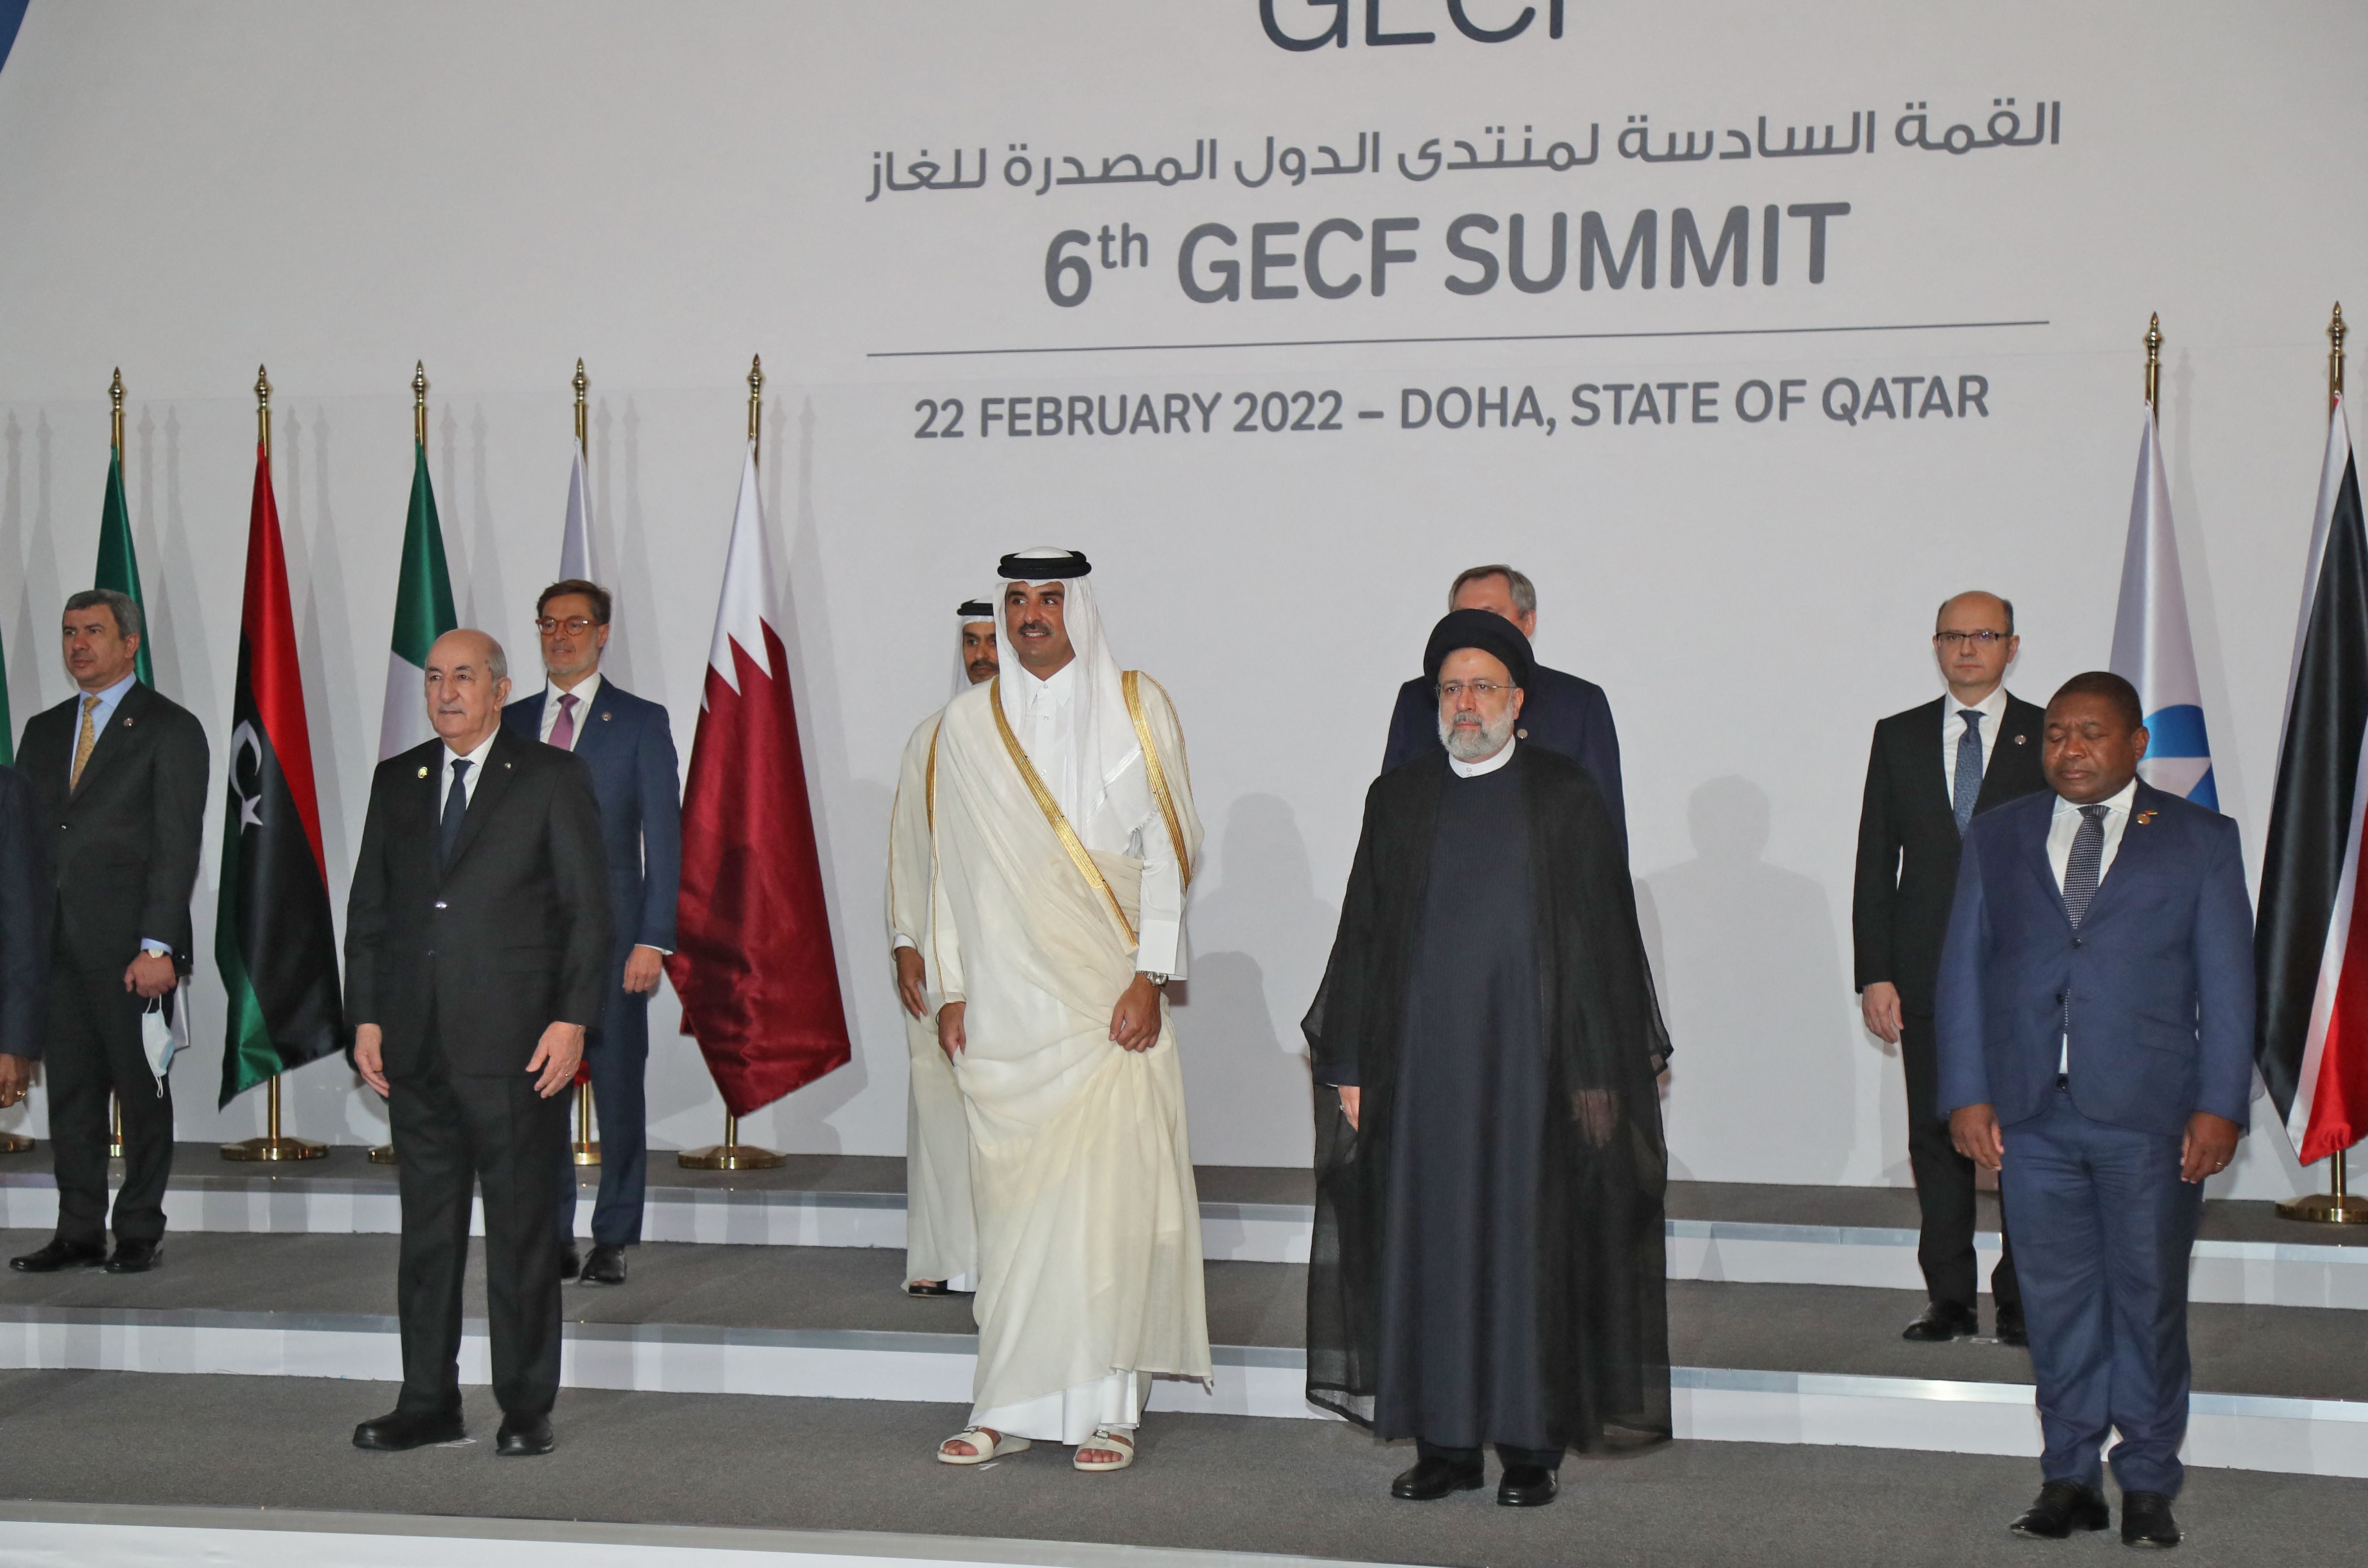 Leaders gather at the Gas Exporting Countries Forum (GECF) summit in Qatar’s capital Doha, 22 February 2022